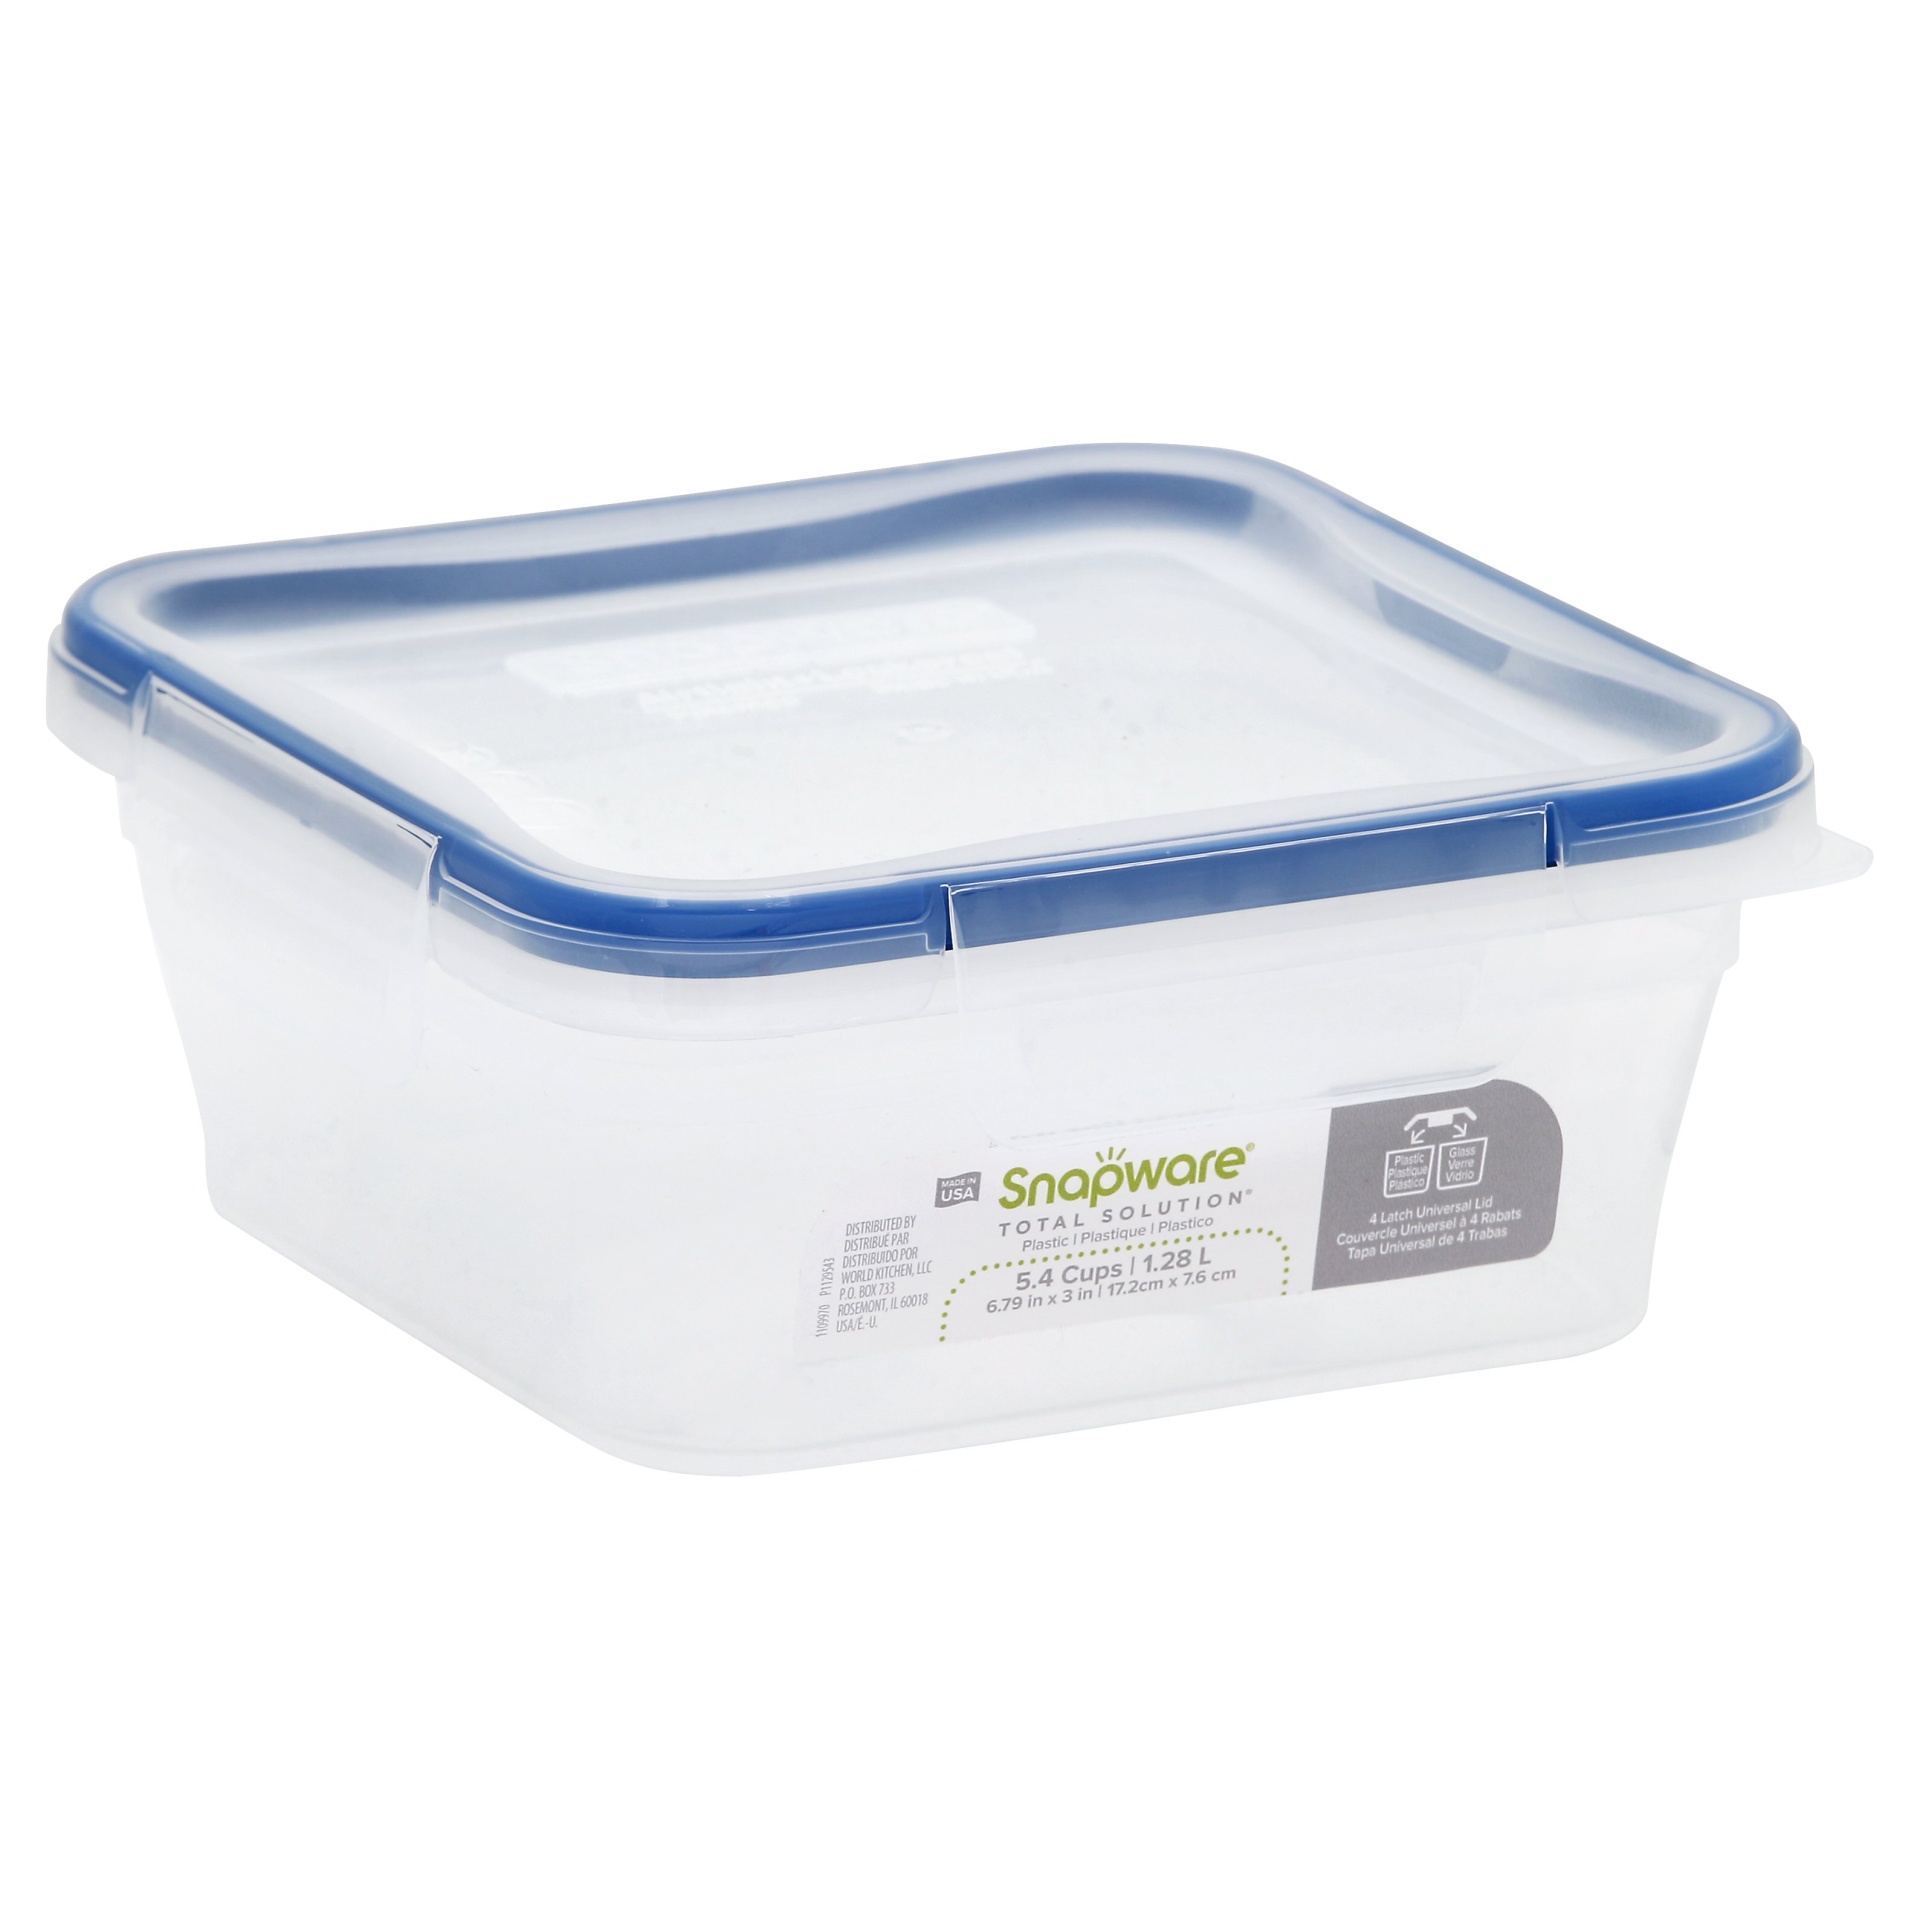 slide 1 of 1, Snapware Total Solution Clear Food Storage Container, 1 ct; 5.4 cups